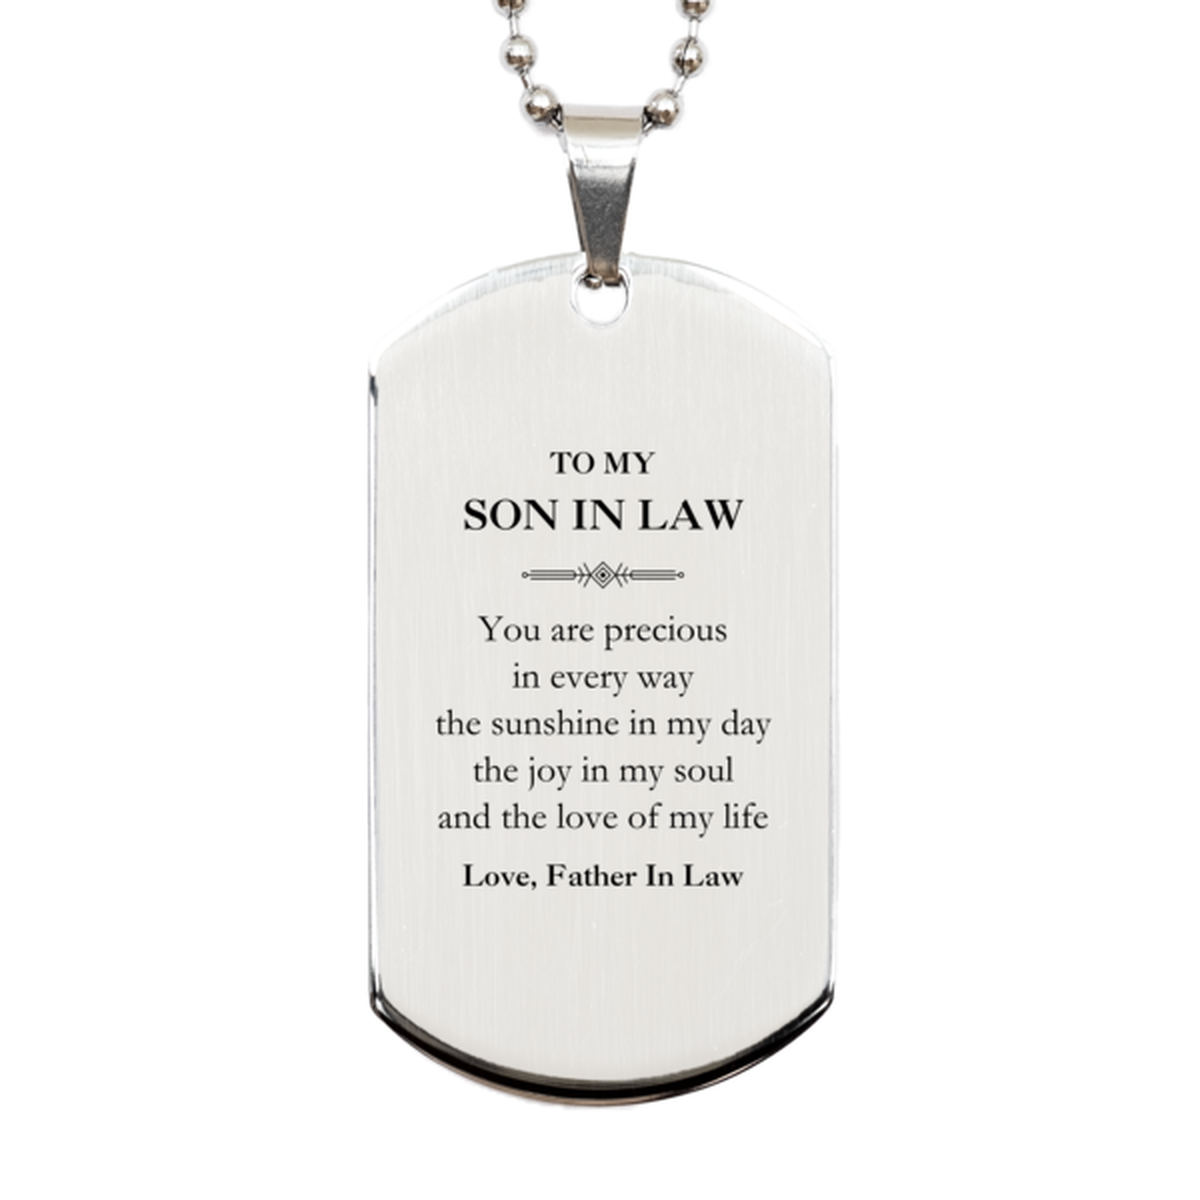 Graduation Gifts for Son In Law Silver Dog Tag Present from Father In Law, Christmas Son In Law Birthday Gifts Son In Law You are precious in every way the sunshine in my day. Love, Father In Law